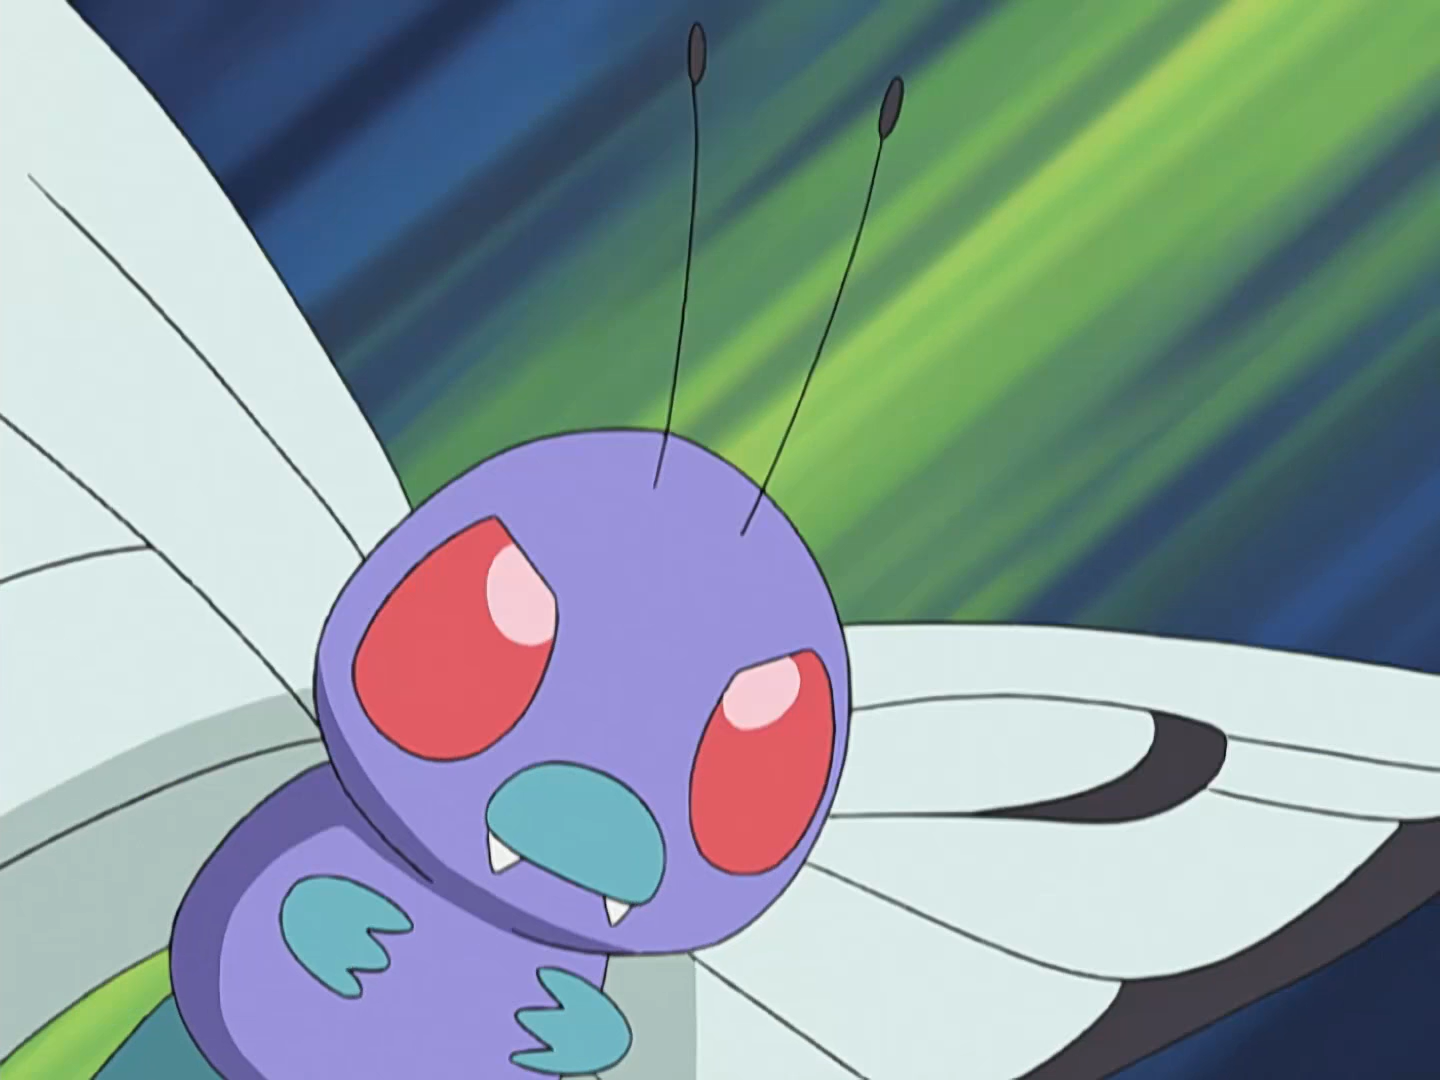 http://img1.wikia.nocookie.net/__cb20150125220259/pokemon/images/e/e7/Drew_Butterfree.png